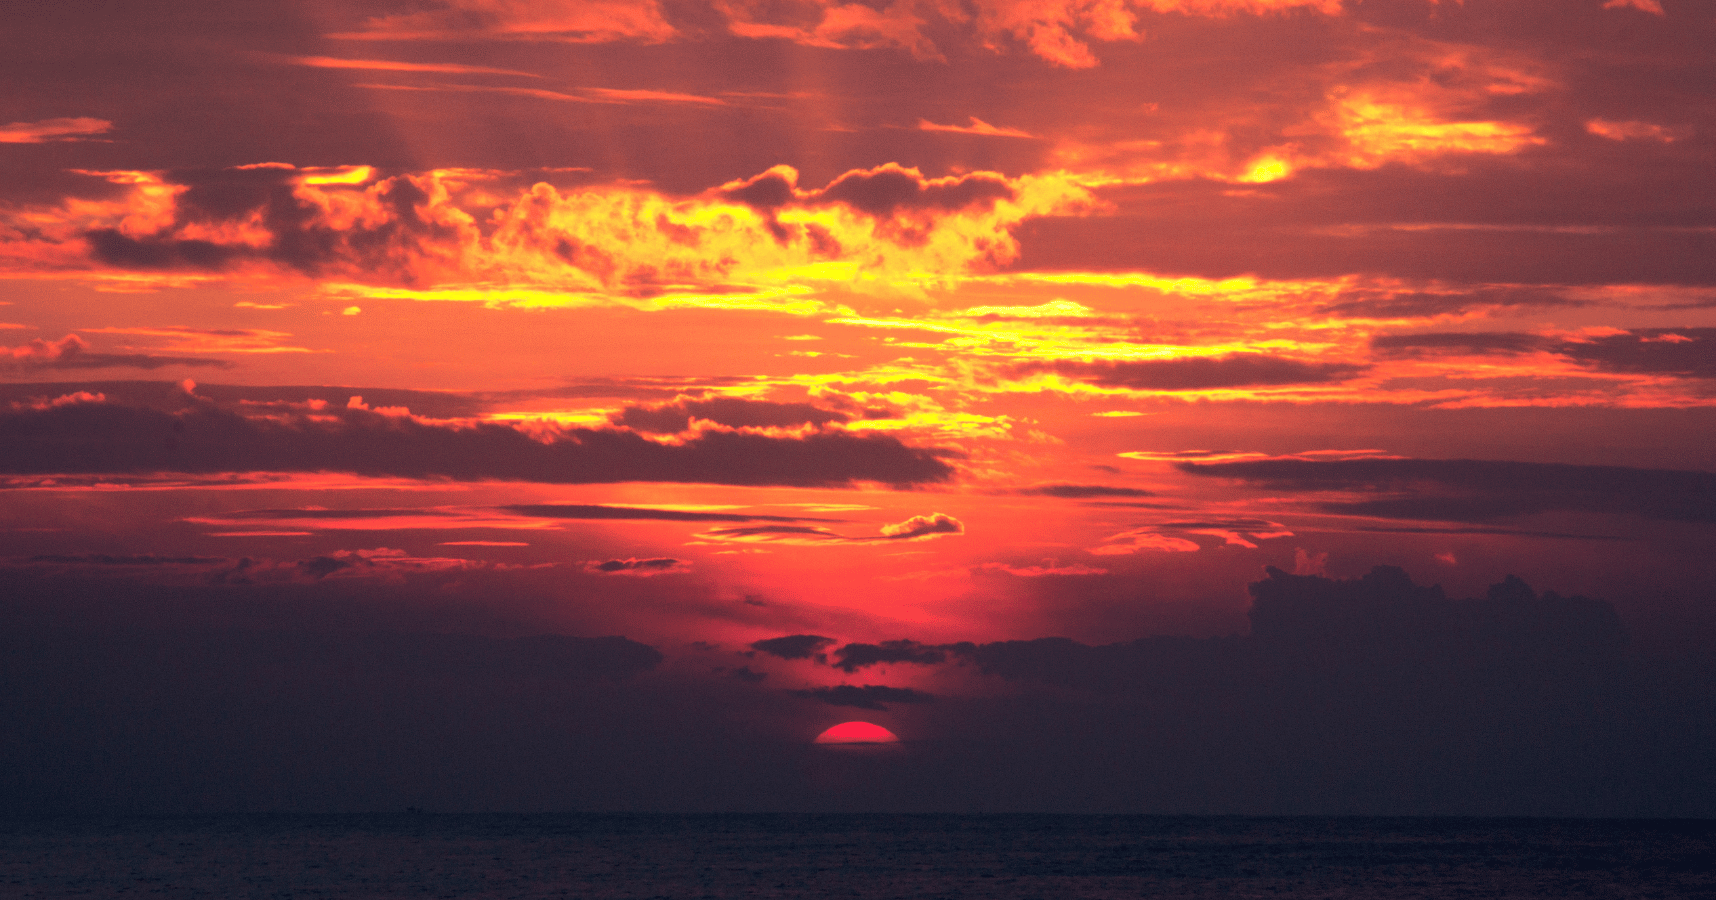 Image of a sunset turning the sky bright pink and orange, in reference to the sunsetting of Universal Analytics.